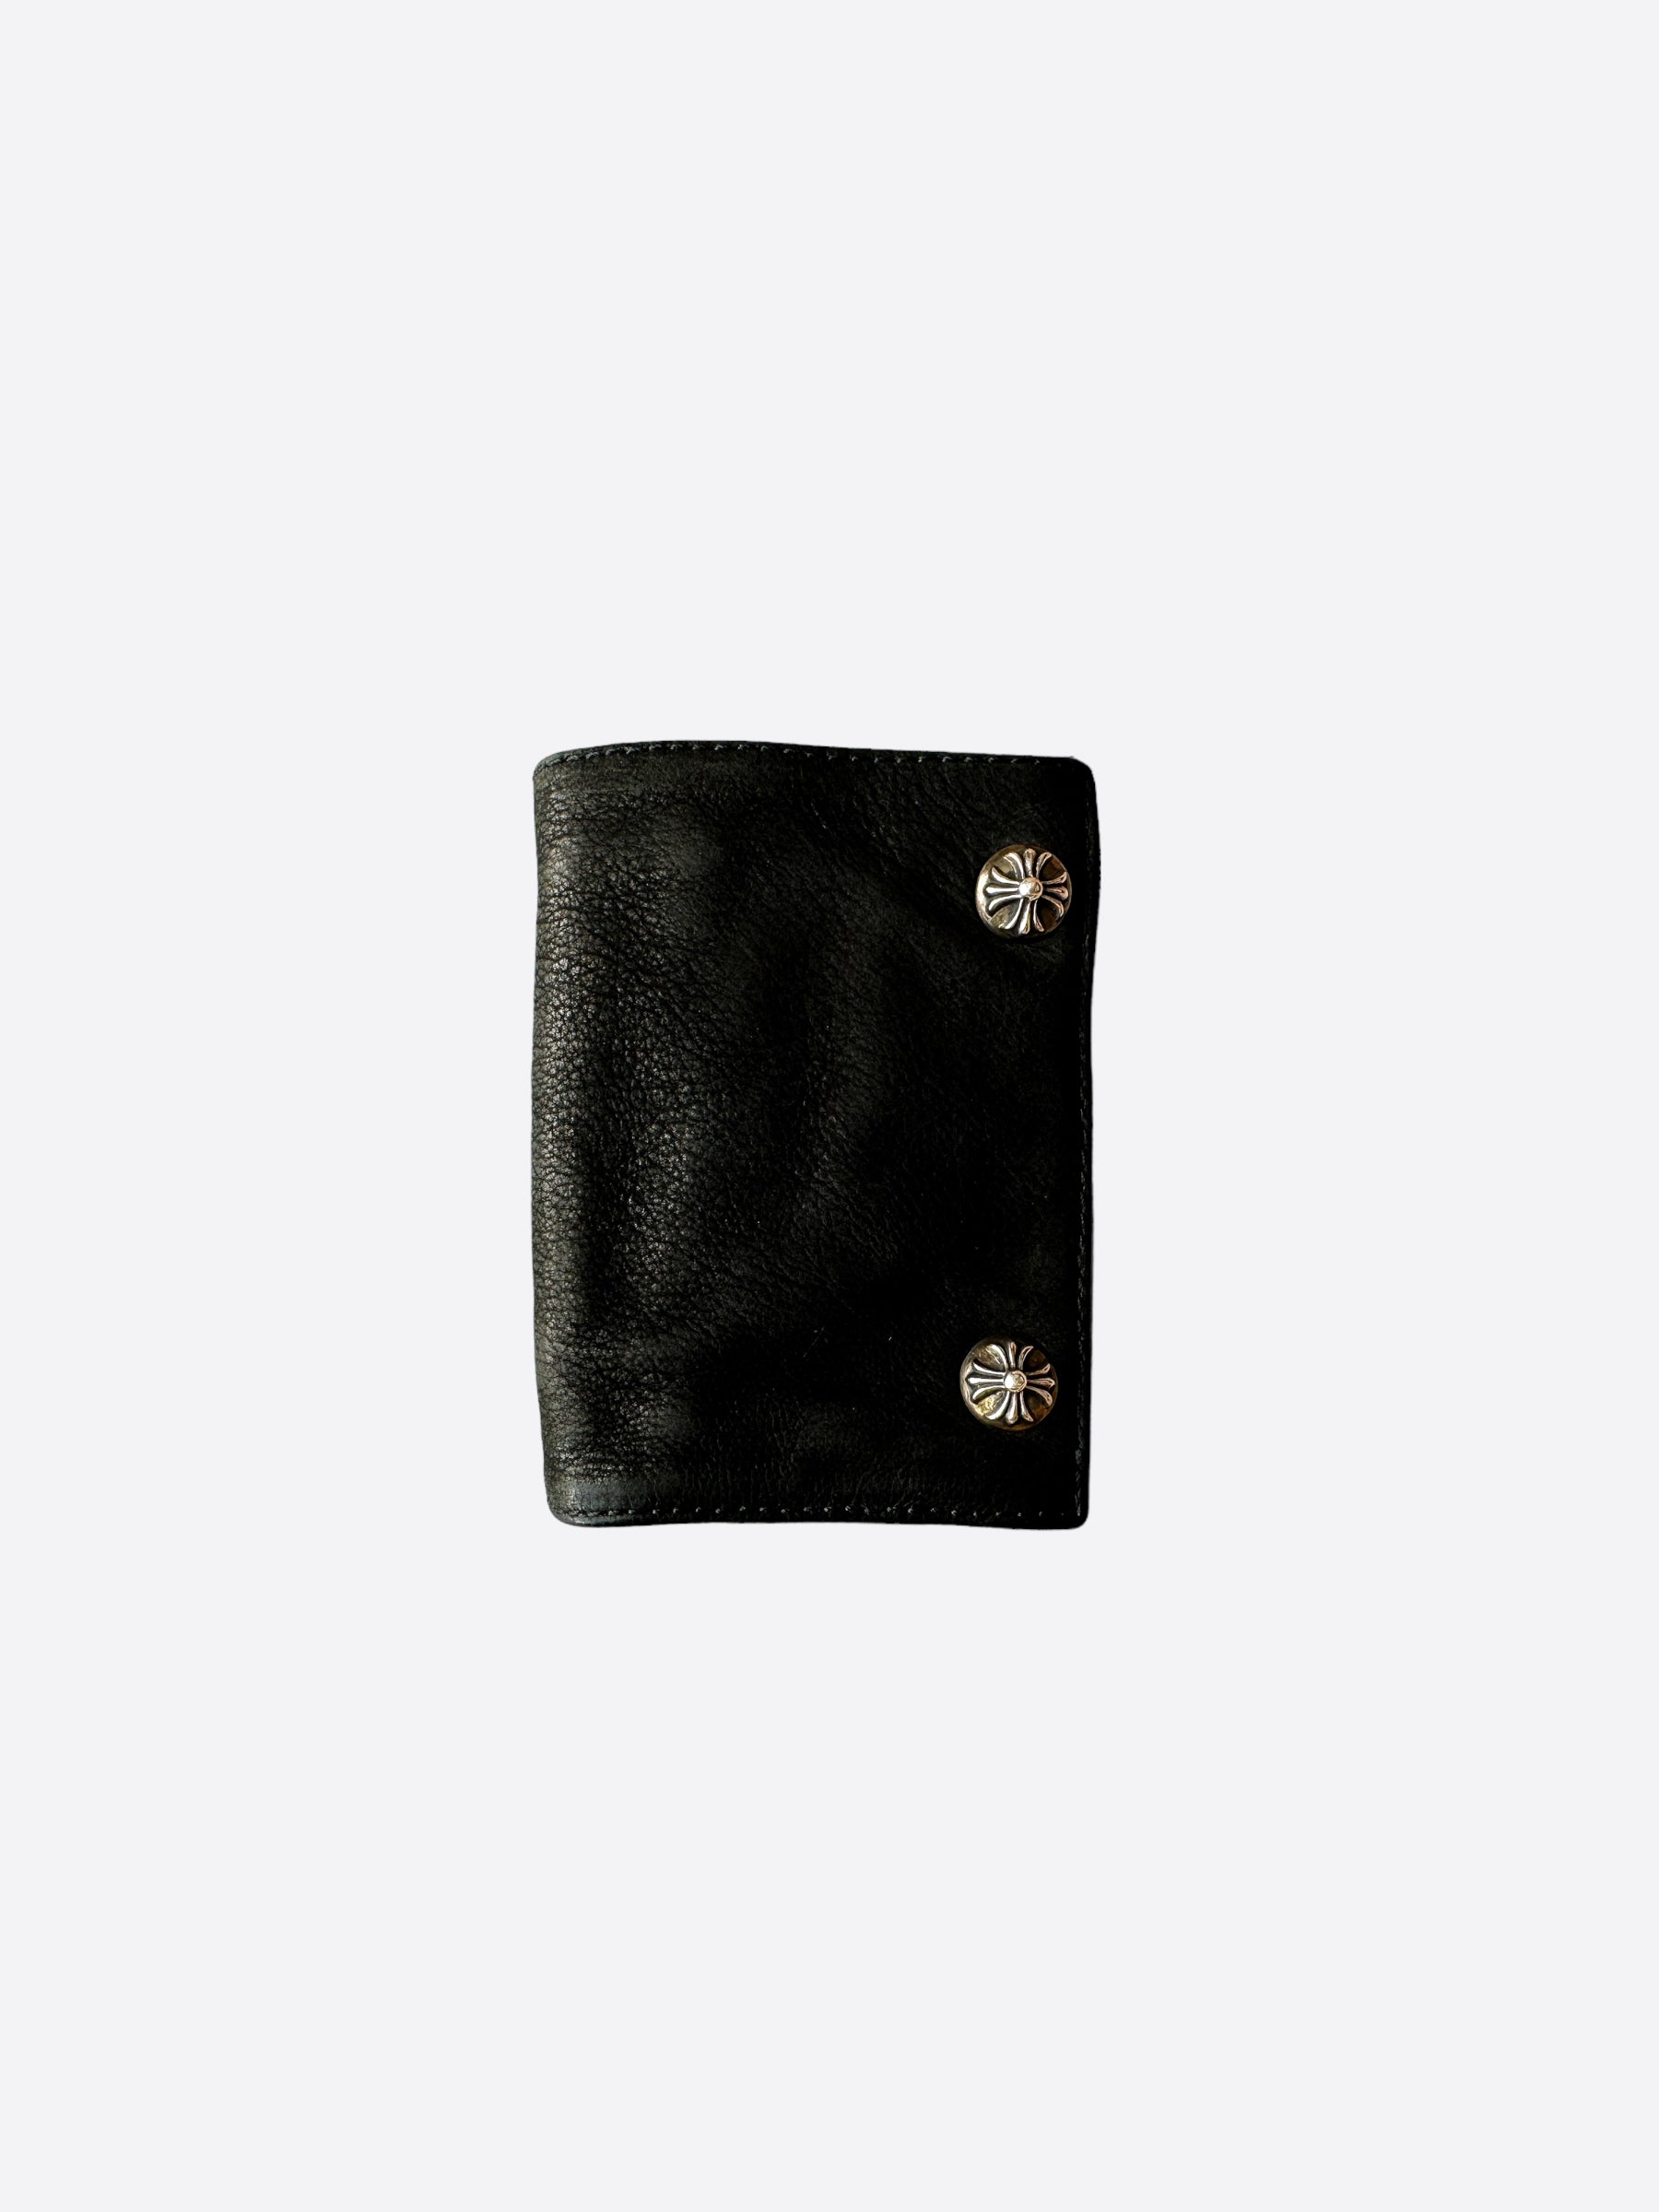 Chrome Hearts Black Leather Trifold Wallet